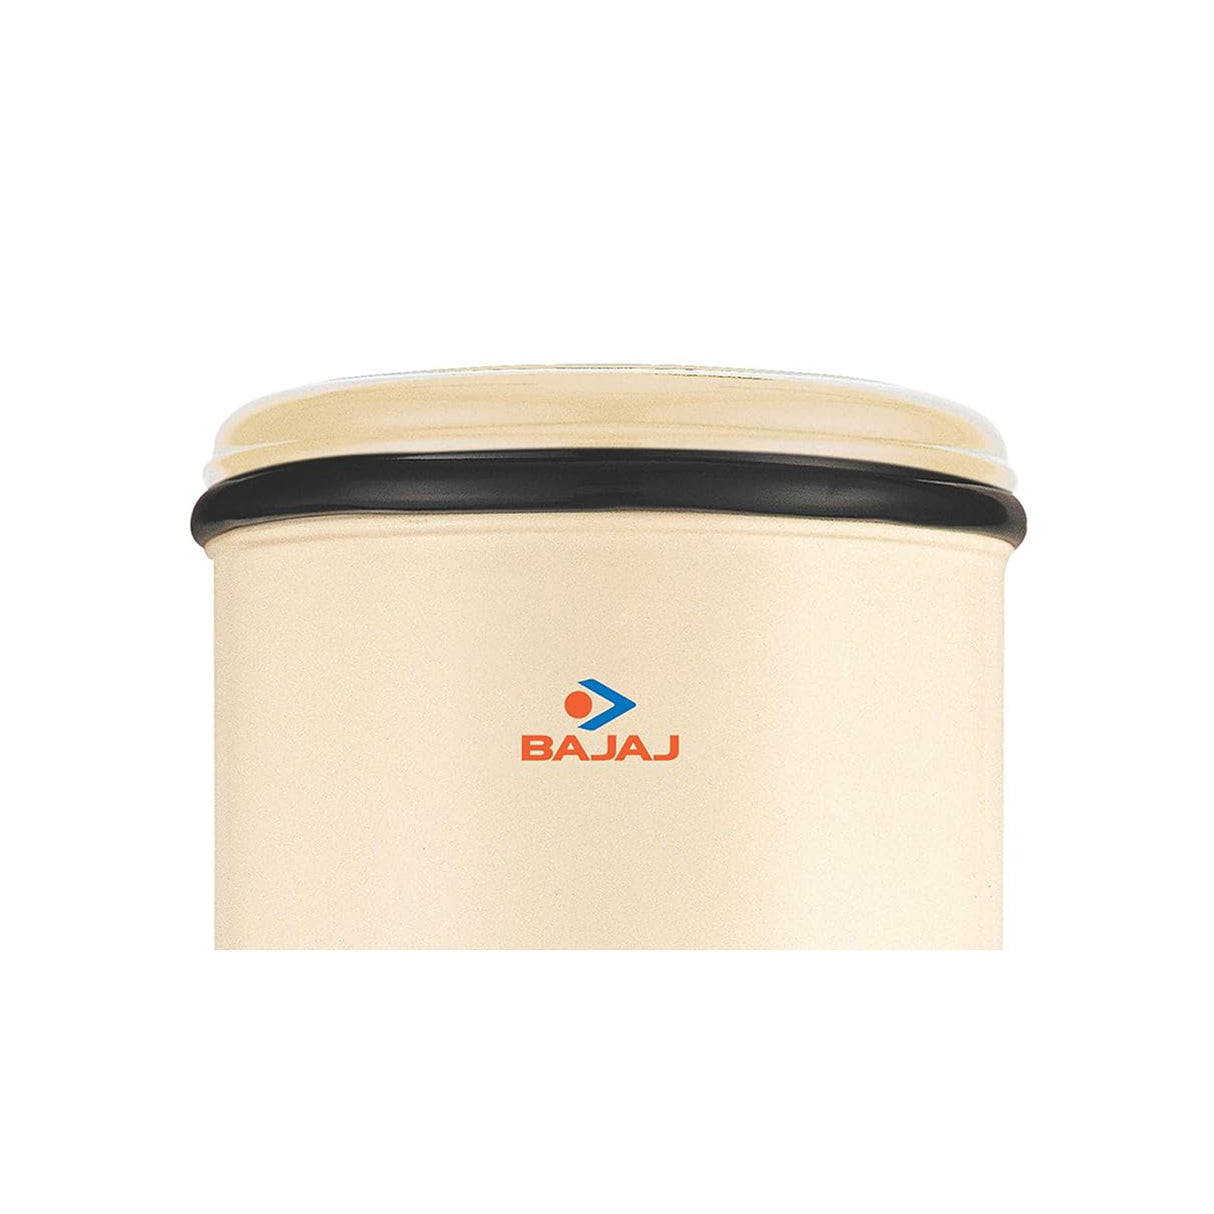 Bajaj Shakti Plus: Ivory 25L Water Heater - Your go-to home appliance for water heating.